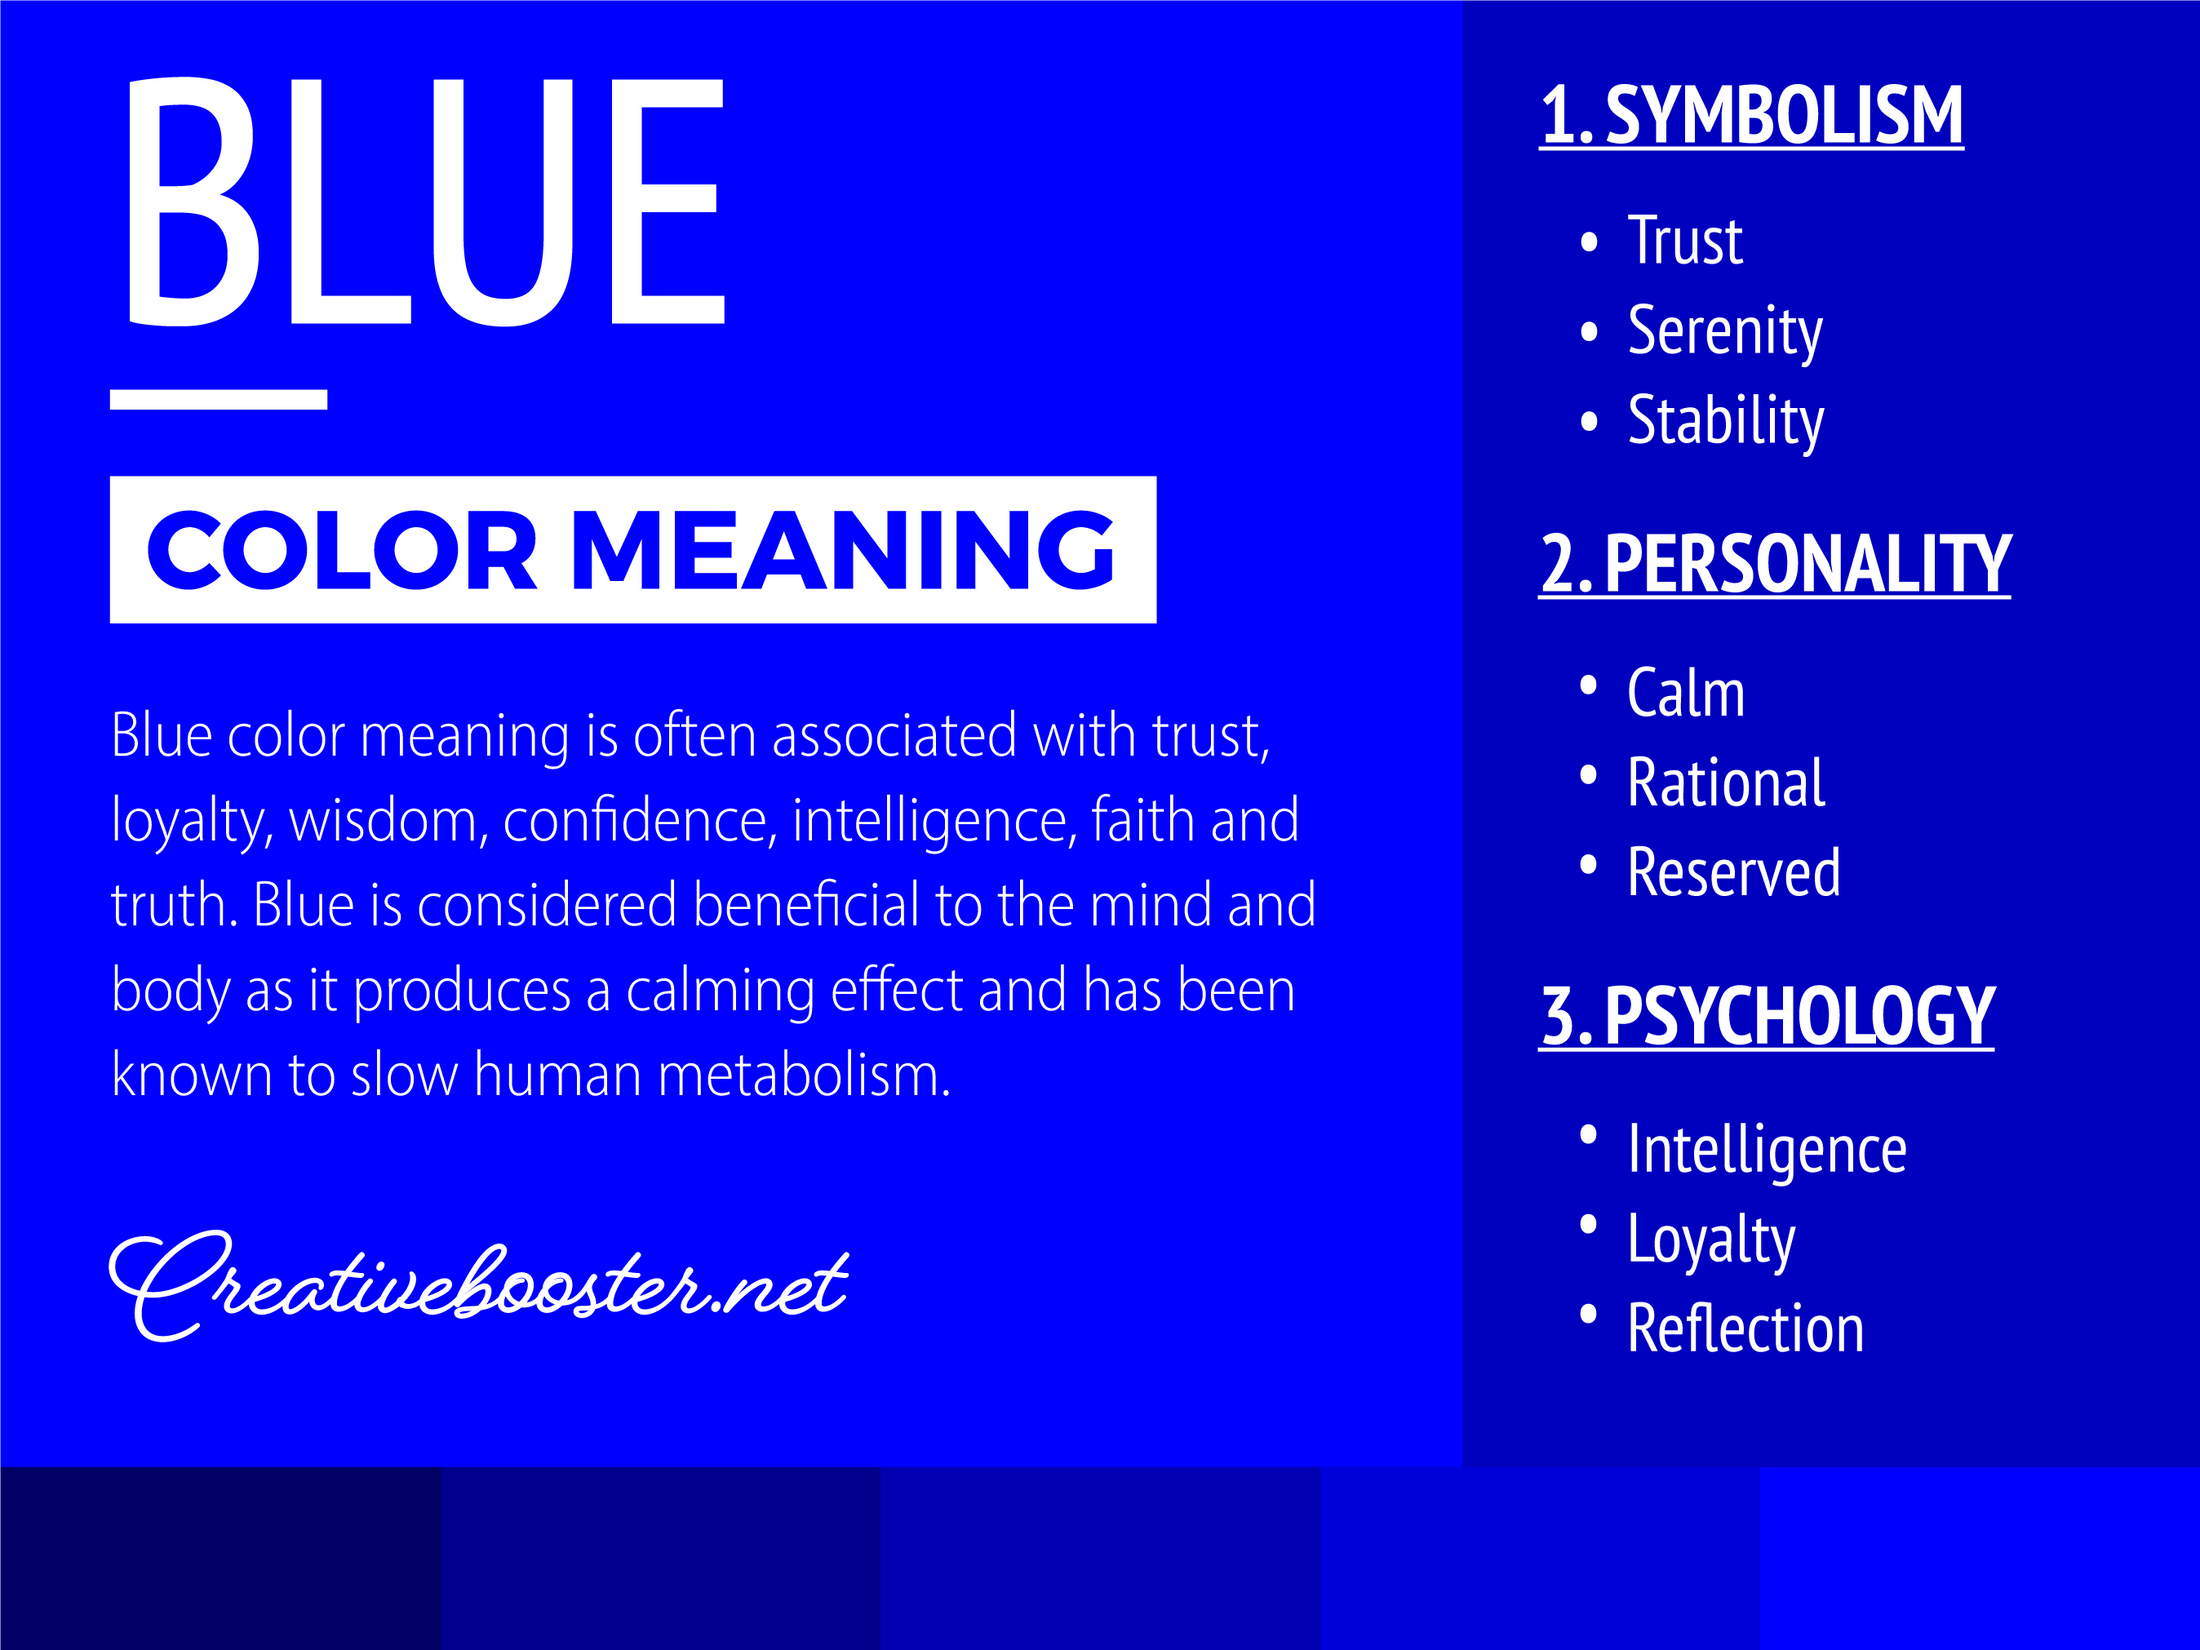 Blue hair is code for creativity - wide 7